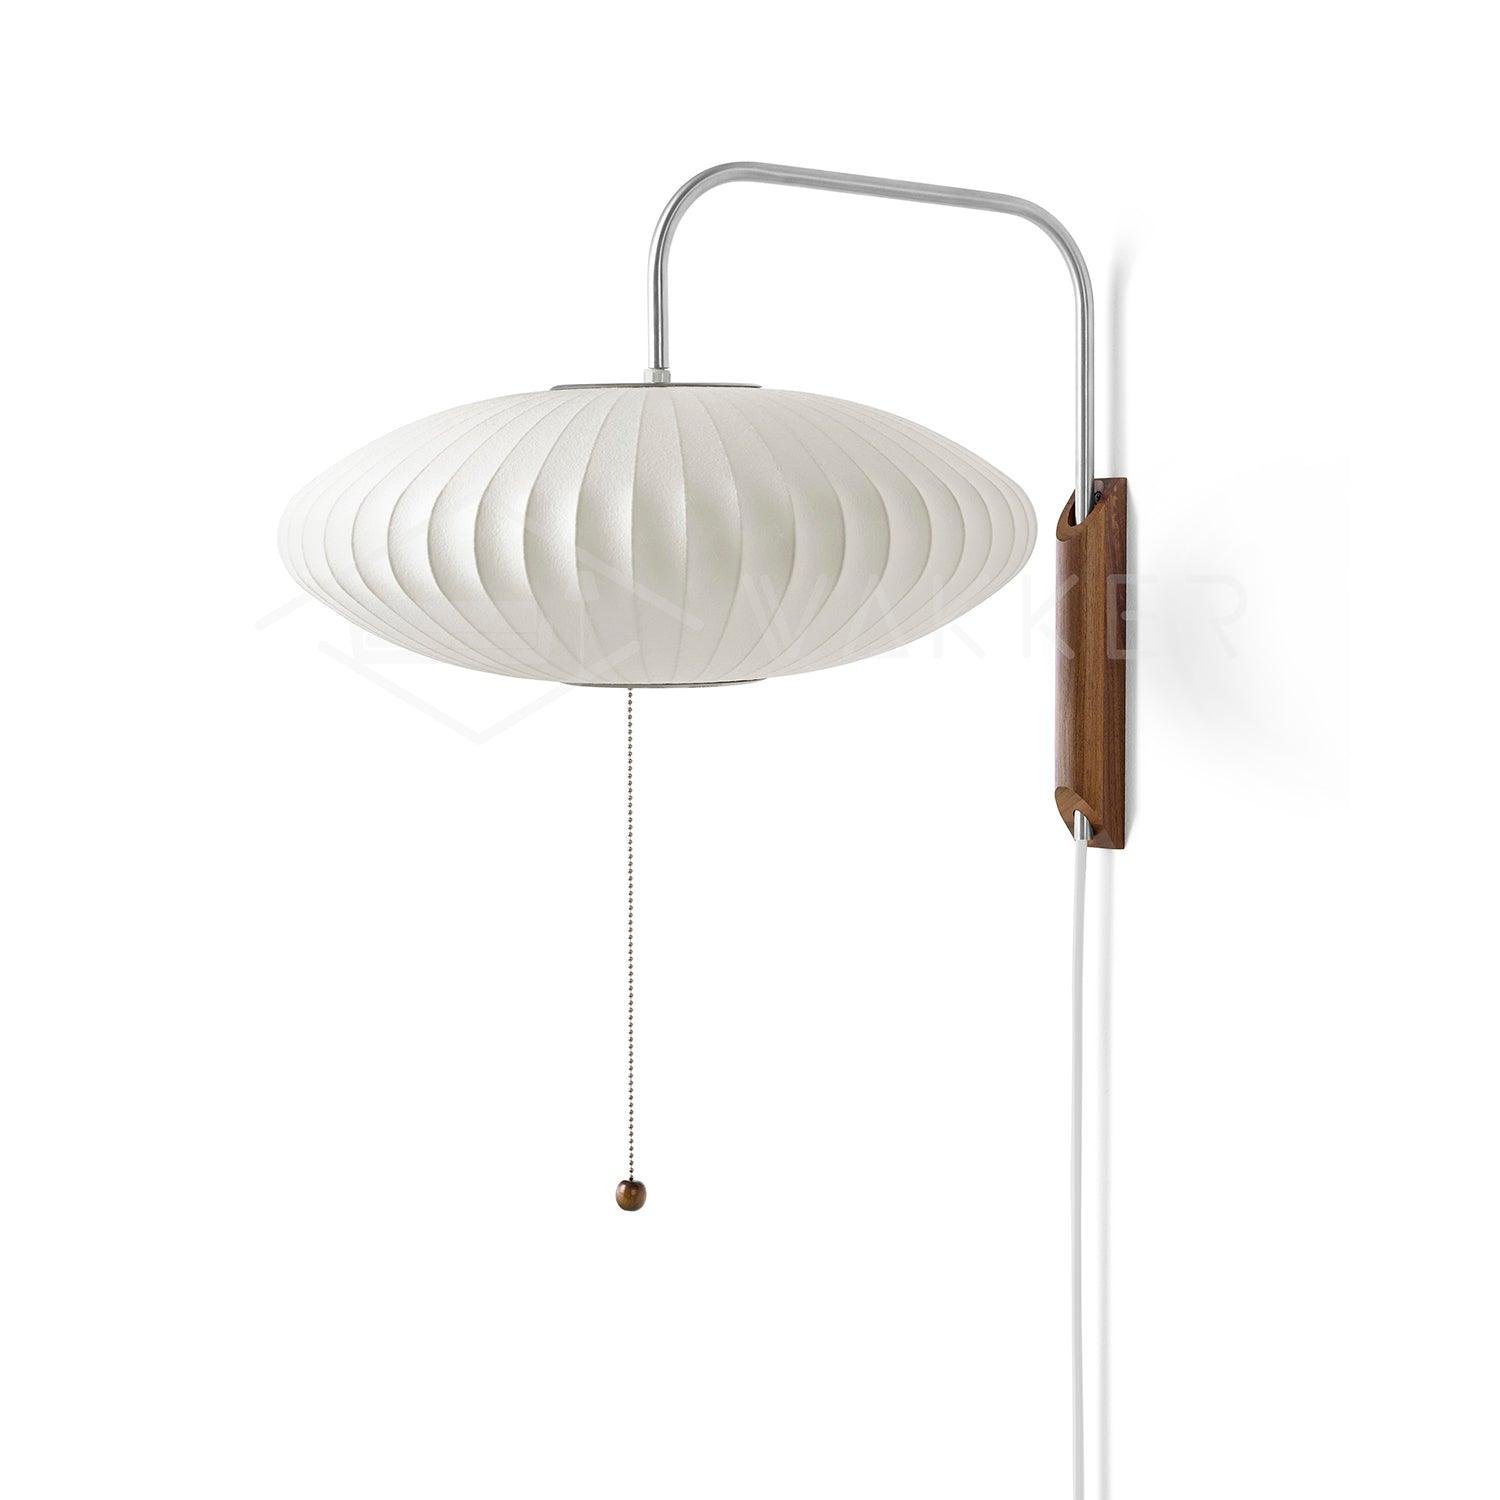 Nelson Wall Sconce in White and Walnut with 15.7 inch Diameter and 8.6 inch Height (or 40cm x 22cm)